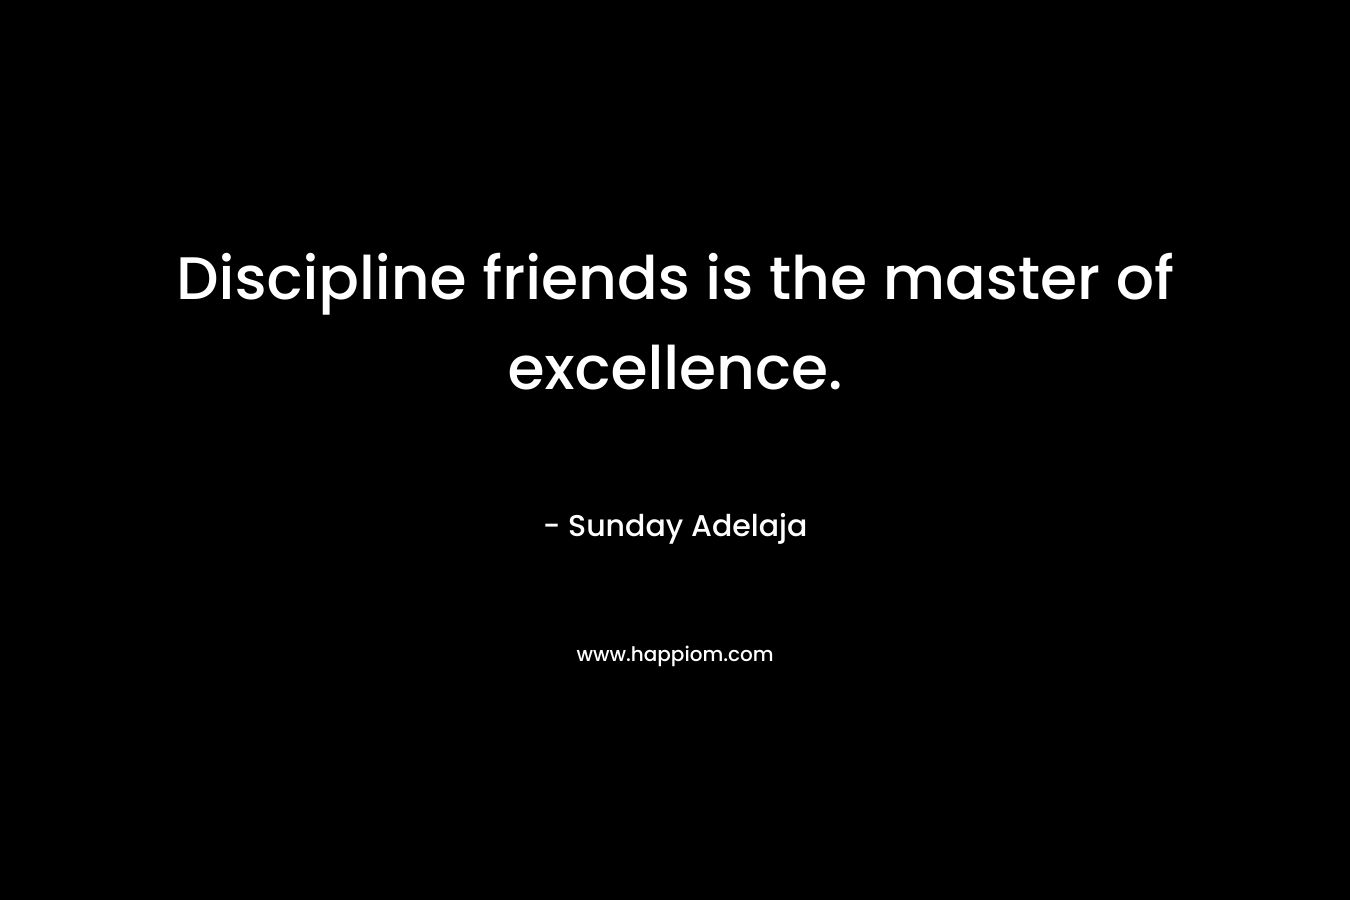 Discipline friends is the master of excellence.